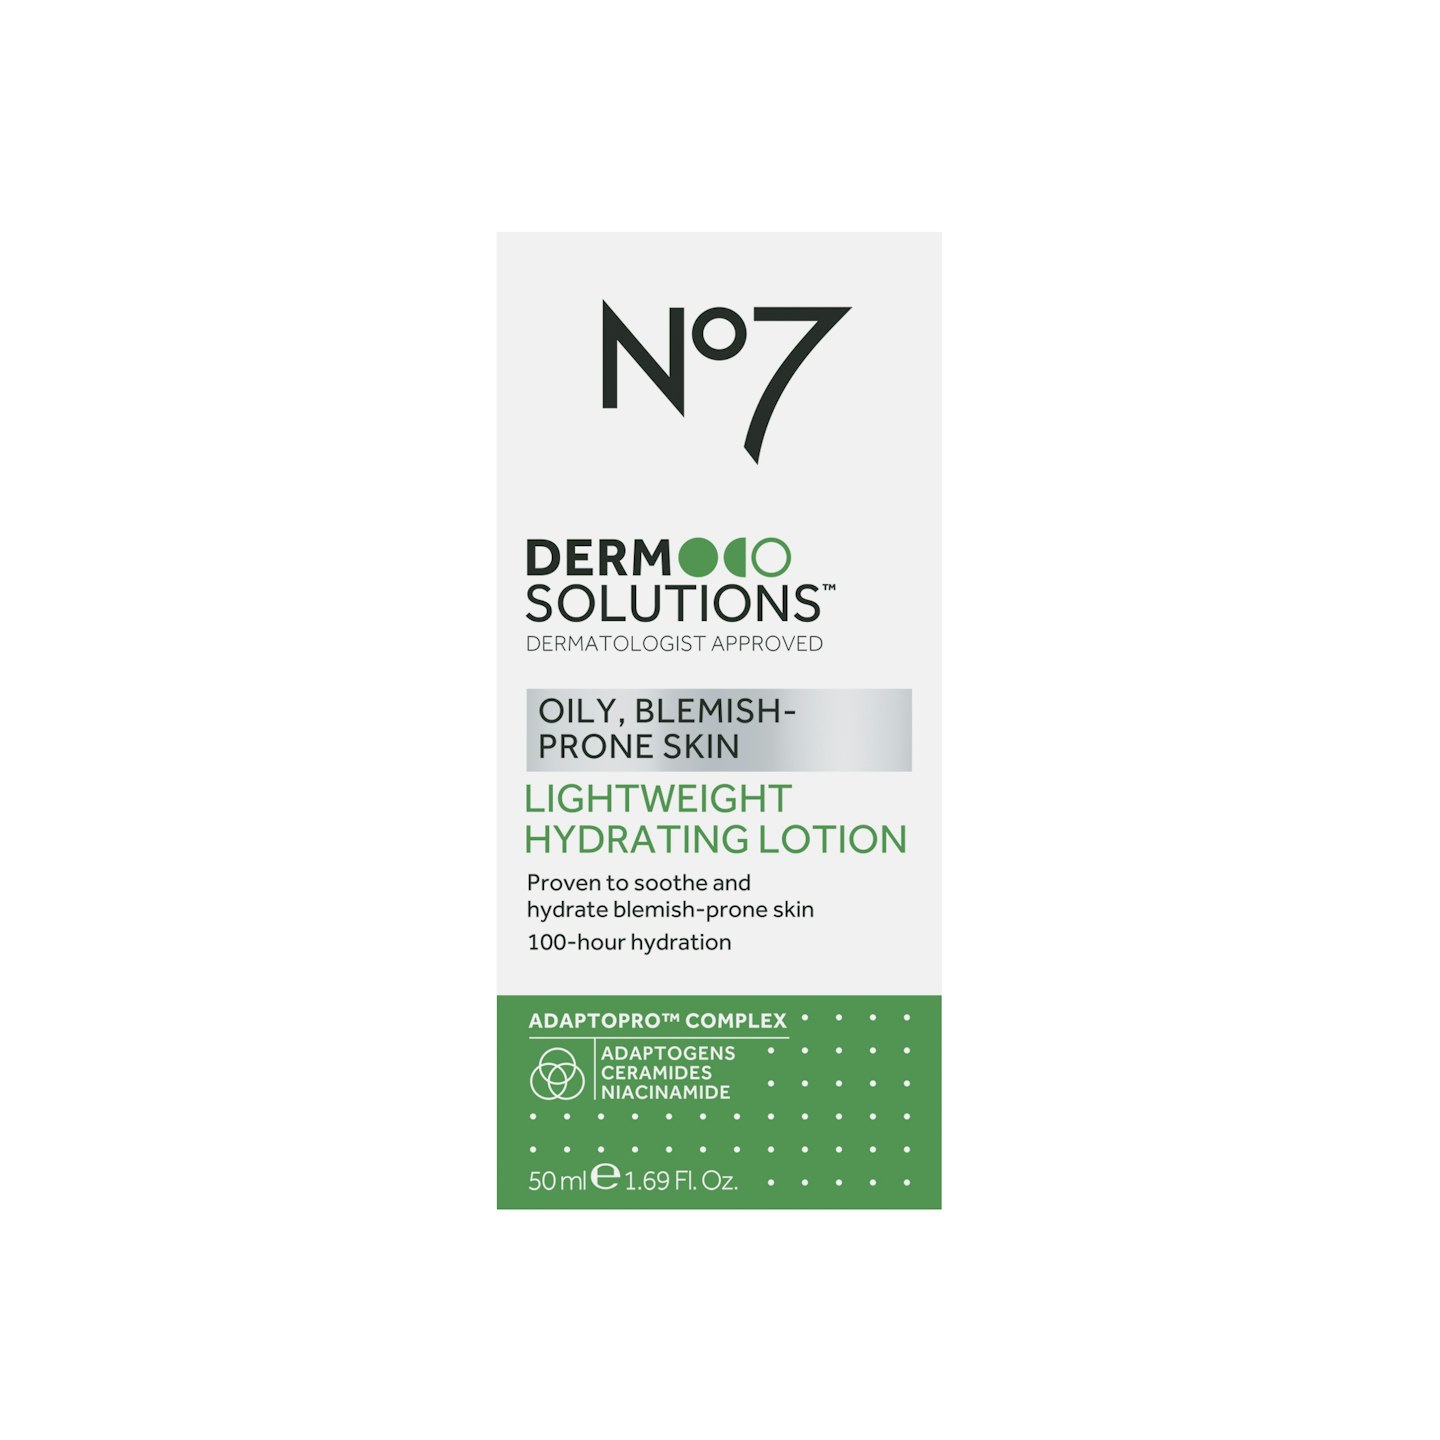 No7 enters the Healthy Skin category with launch of new Derm Solutions  range and in-store service